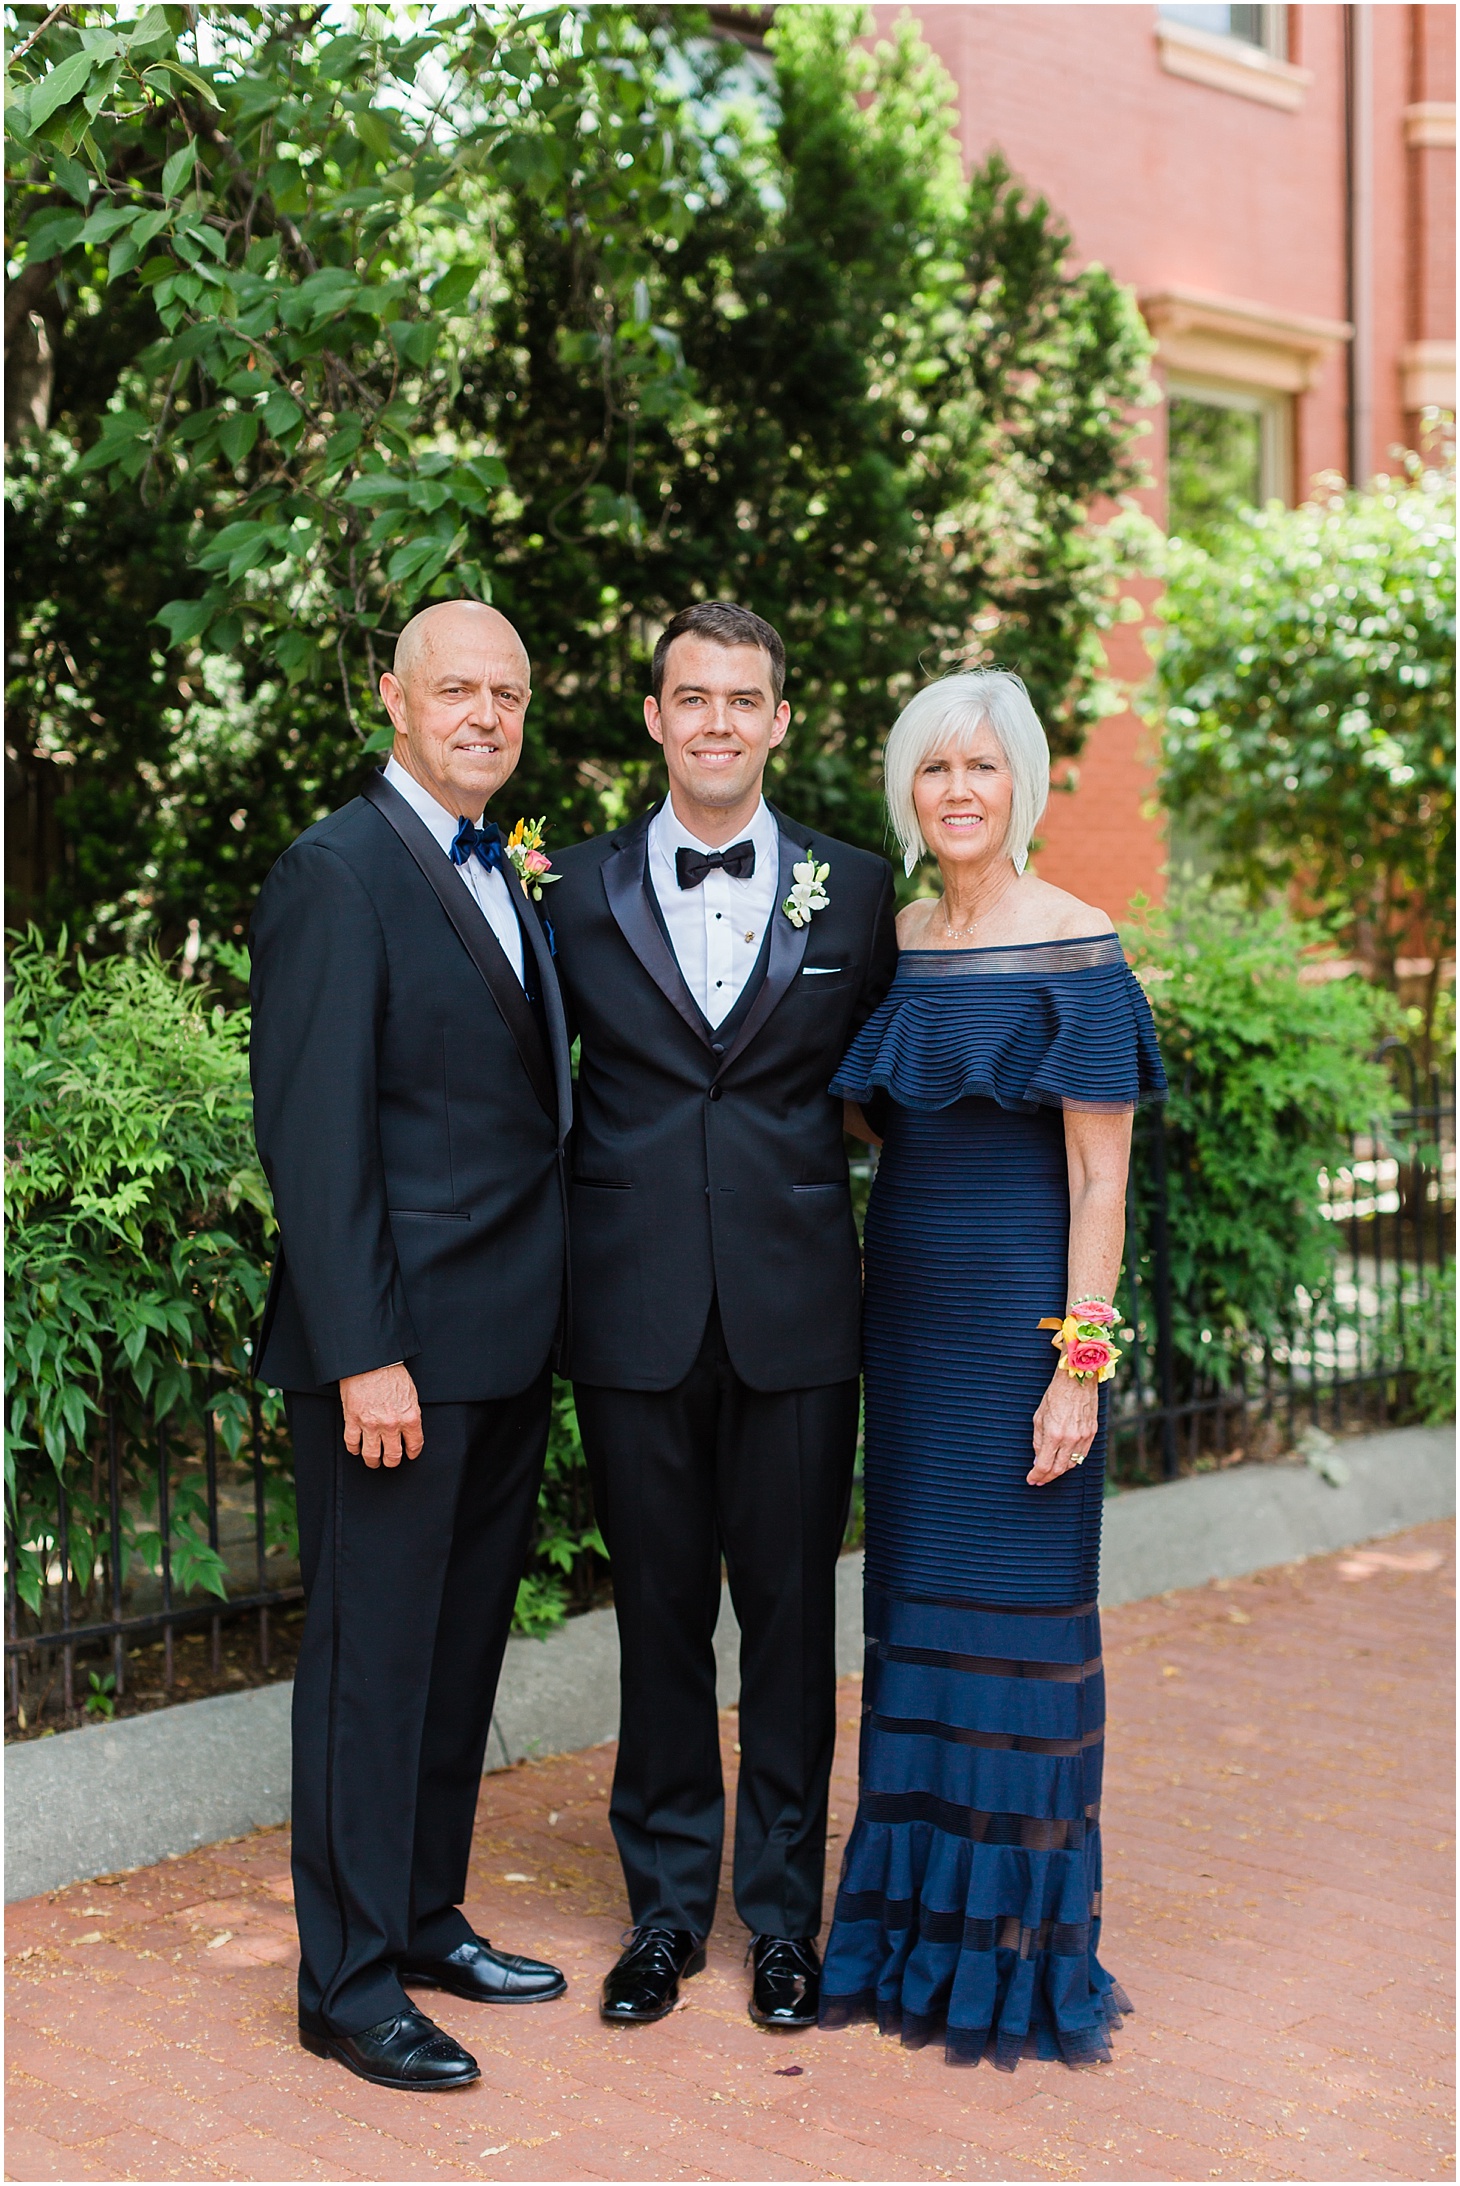 Groom with Parents before Ceremony, Black Tie Hay-Adams Wedding with Summer Florals, Ceremony at Capitol Hill Baptist Church, Sarah Bradshaw Photography, DC Wedding Photographer